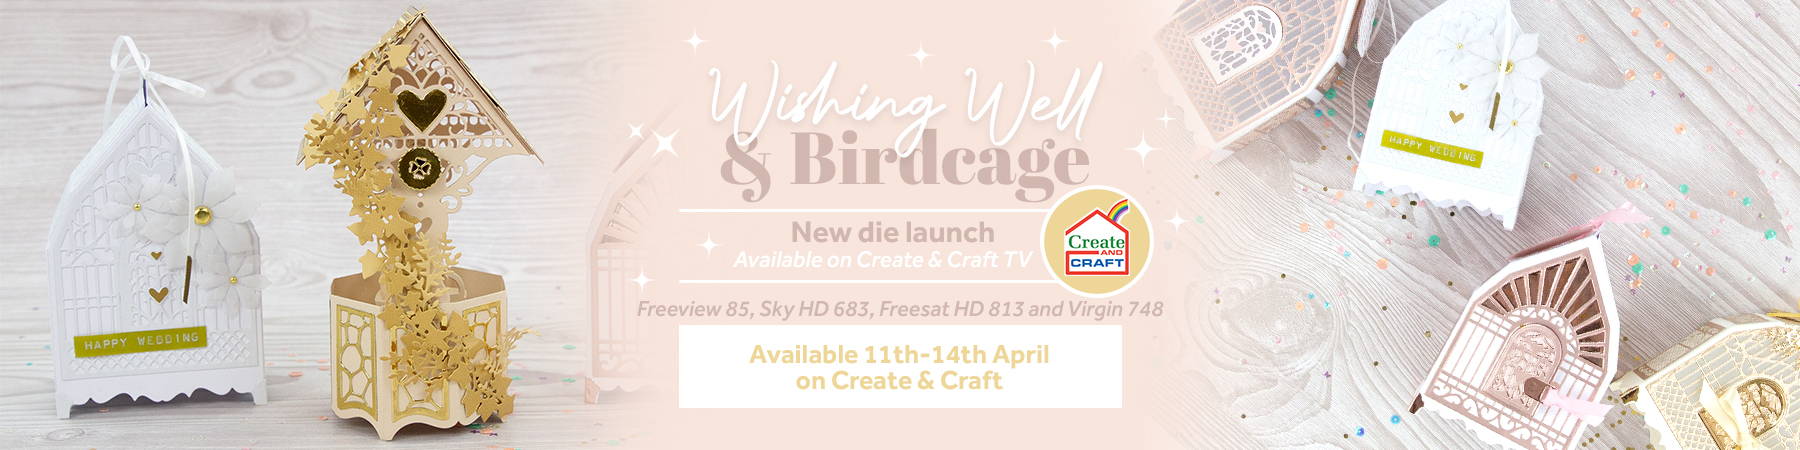 Domed Card & Gift Box Collection, exclusive die launch on Create and Craft TV. 14th to the 18th of February 2022.